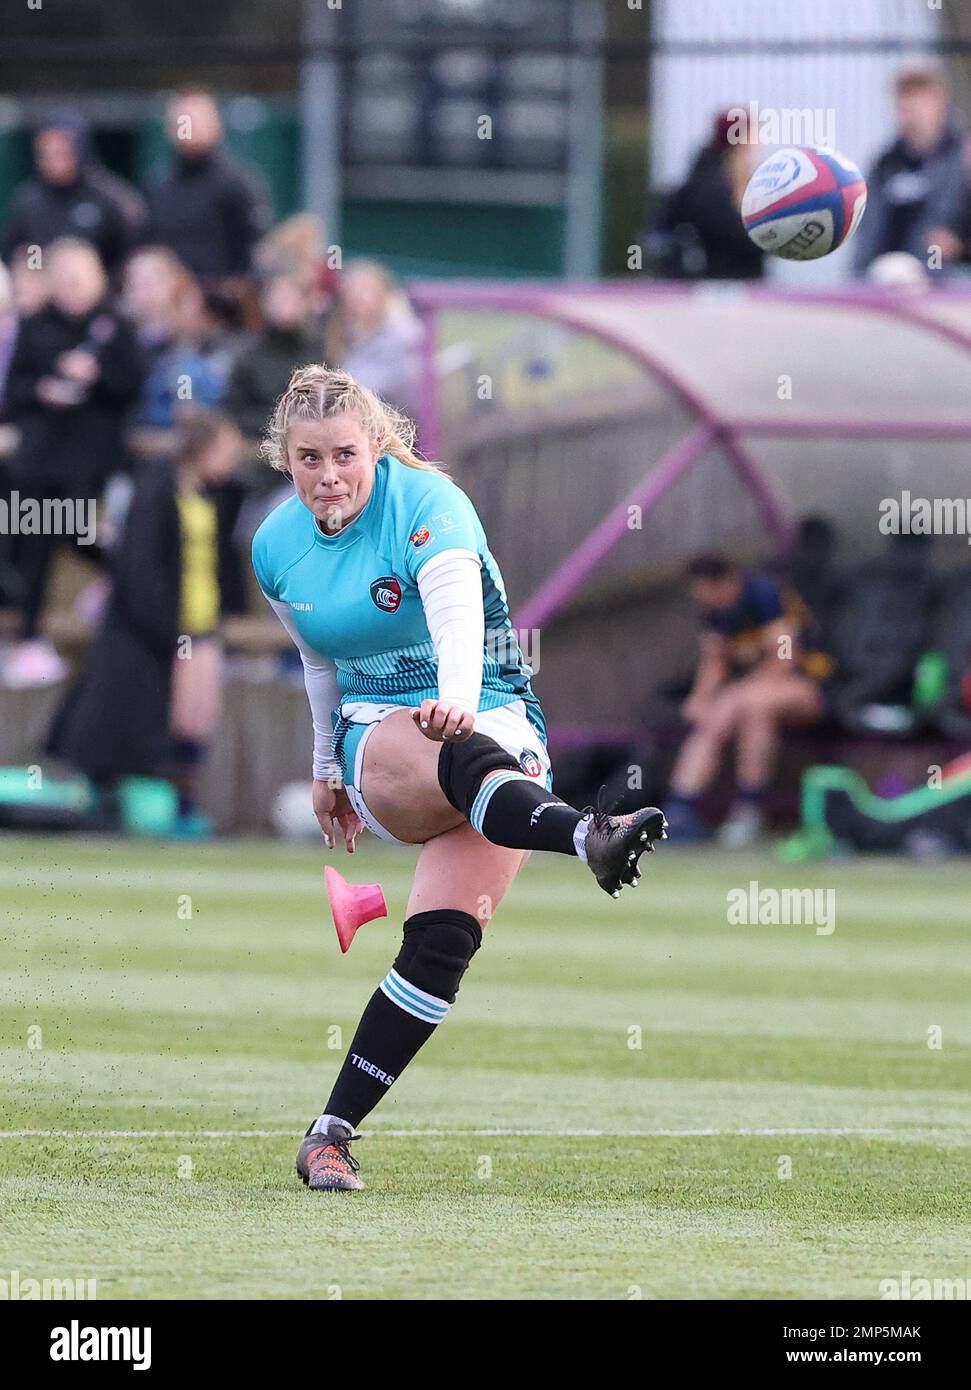 29.01.2023   Loughborough, England. Rugby Union.                   Katie Childs (Leicester Tigers) kicks a conversion during the match played between Leicester Tigers Ladies and Loughborough Ladies in the  RFC Women’s Championship North 1 at Loughborough University.  © Phil Hutchinson Stock Photo